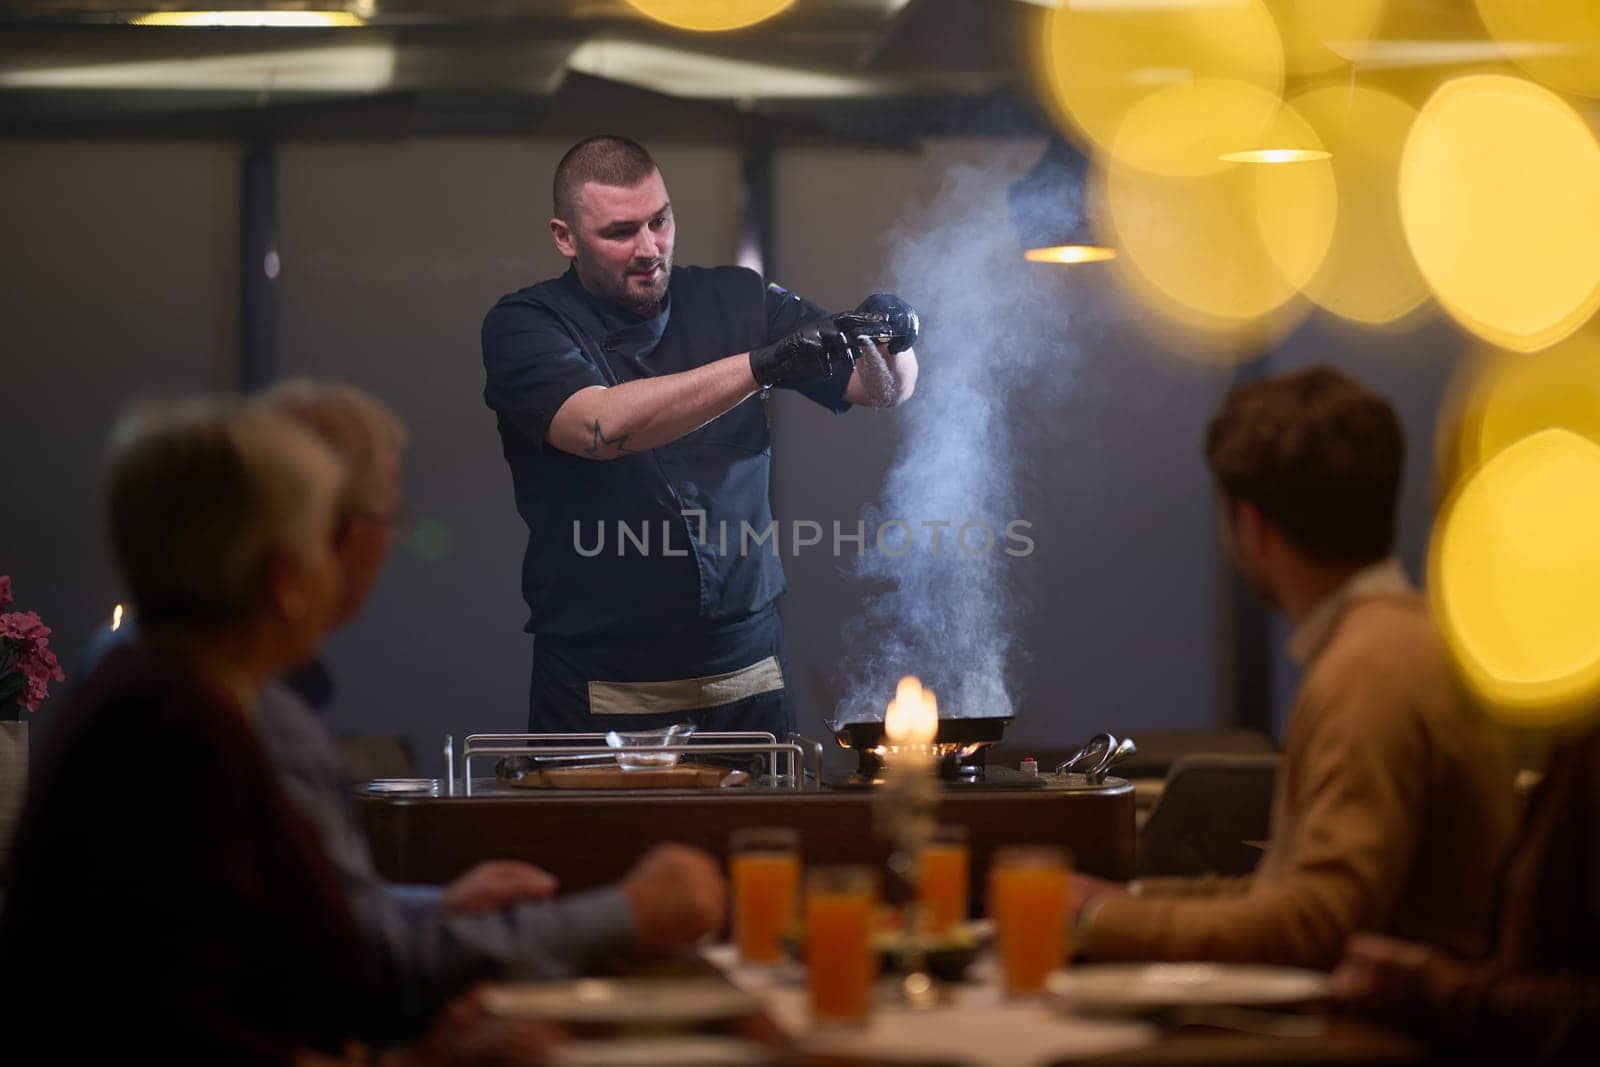 In a restaurant setting, a professional chef presents a sizzling steak cooked over an open flame, while an European Muslim family eagerly awaits their iftar meal during the holy month of Ramadan, blending culinary artistry with cultural tradition in a harmonious dining experience by dotshock